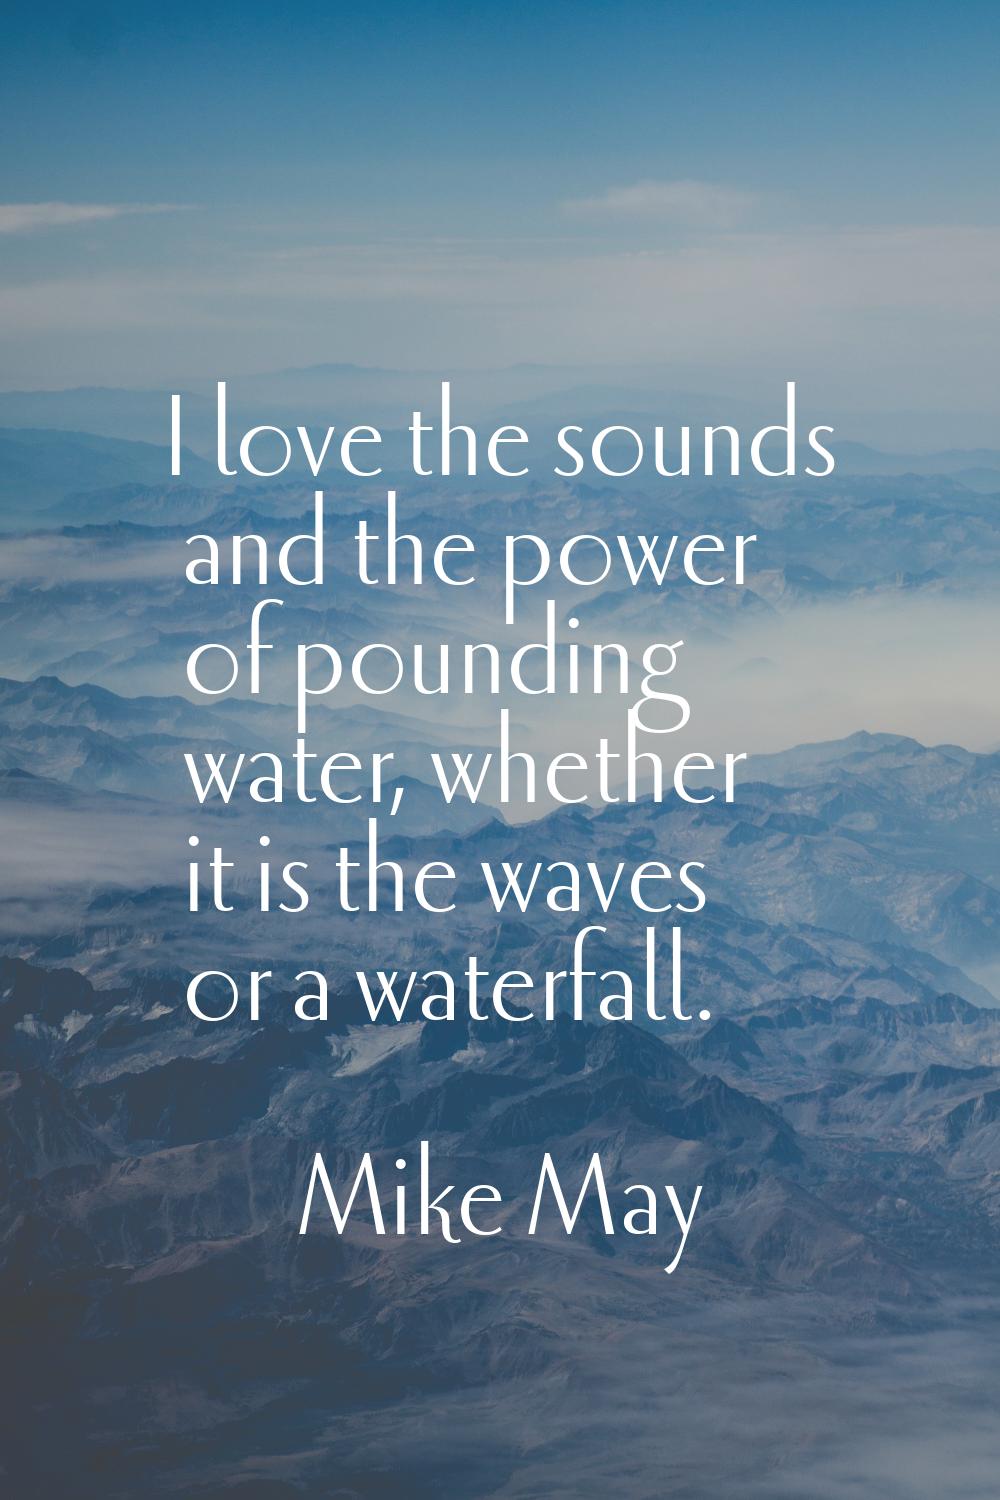 I love the sounds and the power of pounding water, whether it is the waves or a waterfall.